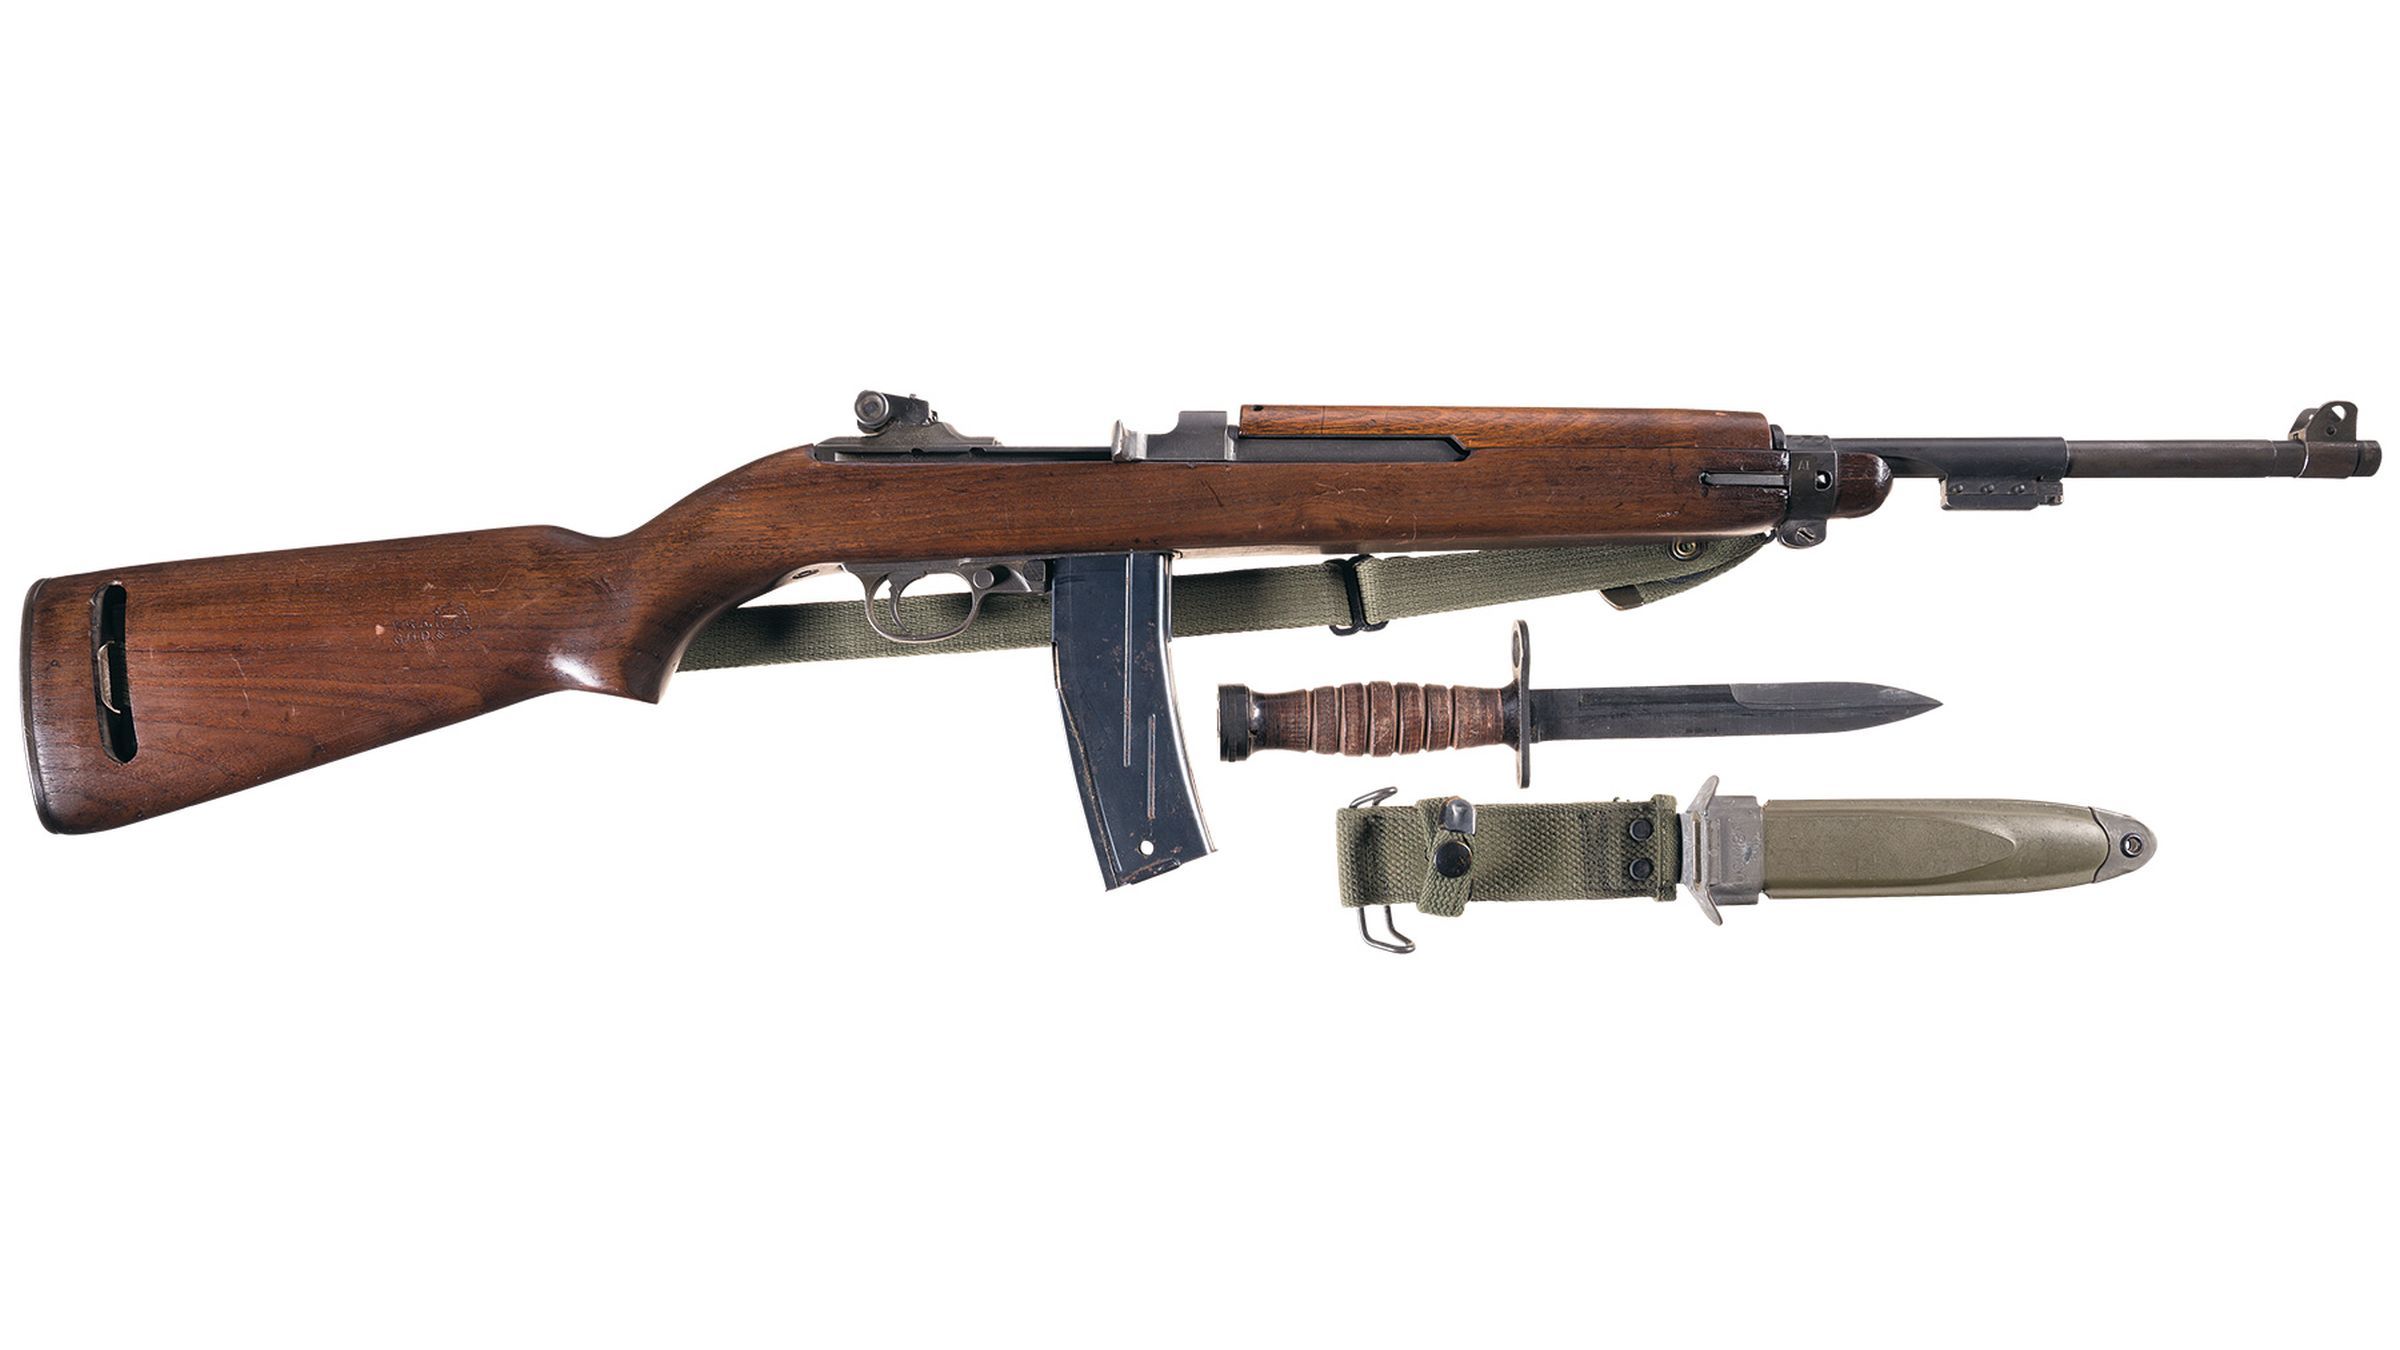 U.S. Winchester M1 Semi-Automatic Carbine with Two Extra Magazines and a Ba...